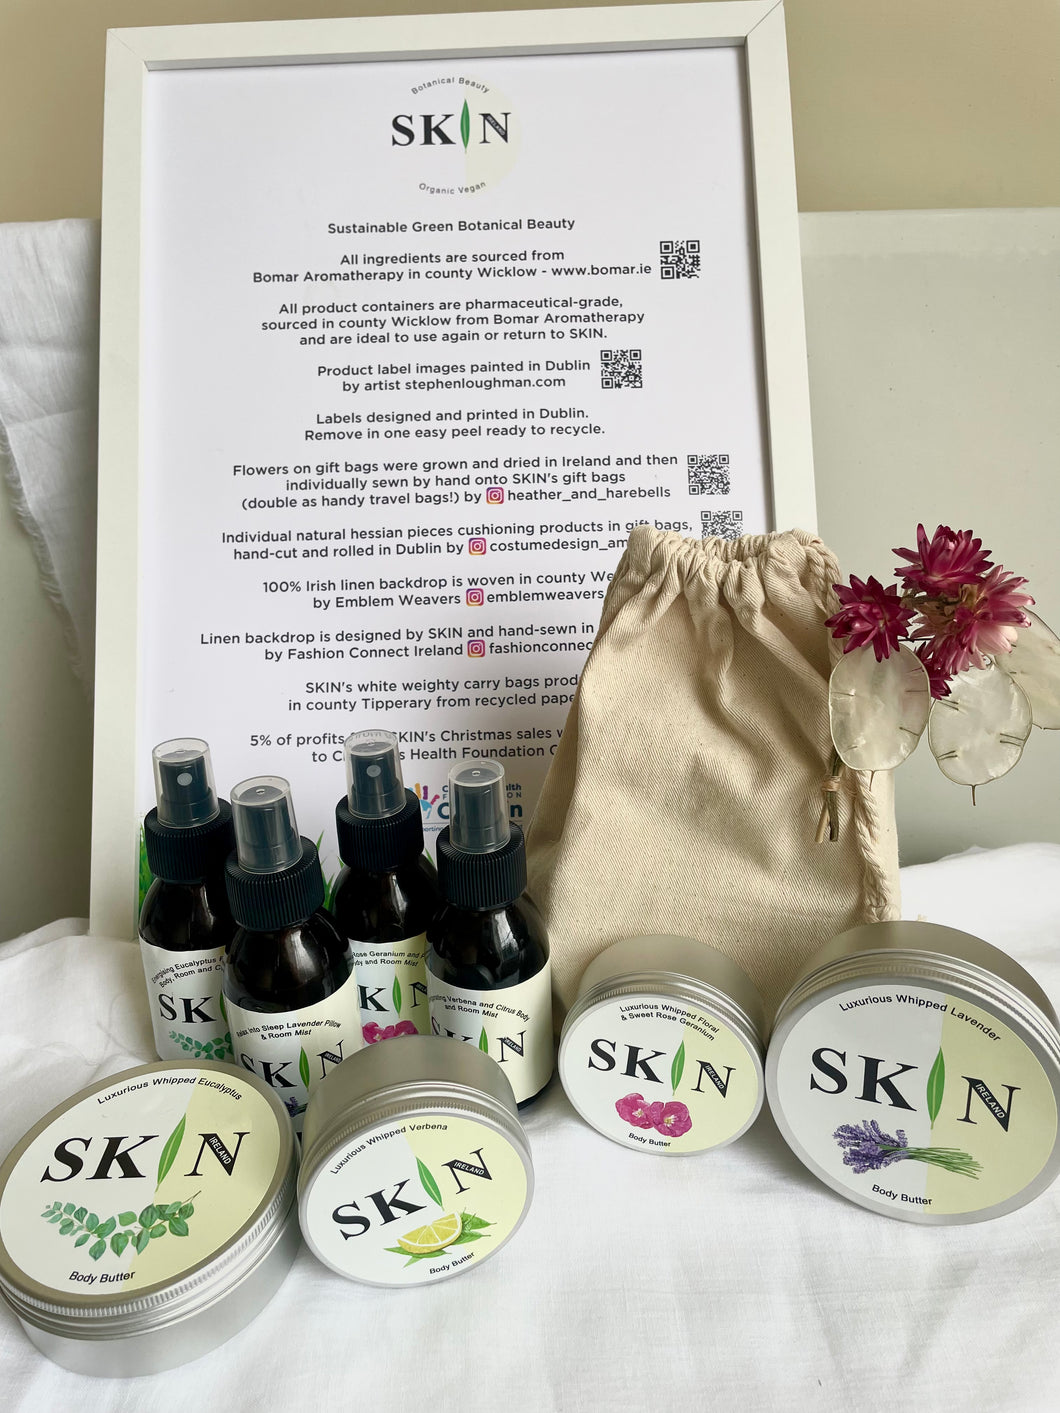 Sustainable Gift Bag of Medium (100ml) Luxurious Lavender Body Butter and Relax into Sleep Lavender Pillow and Room Mist.  Gift bag features Irish grown and naturally dried flower, hand-sewn onto linen bag - handy for travel !